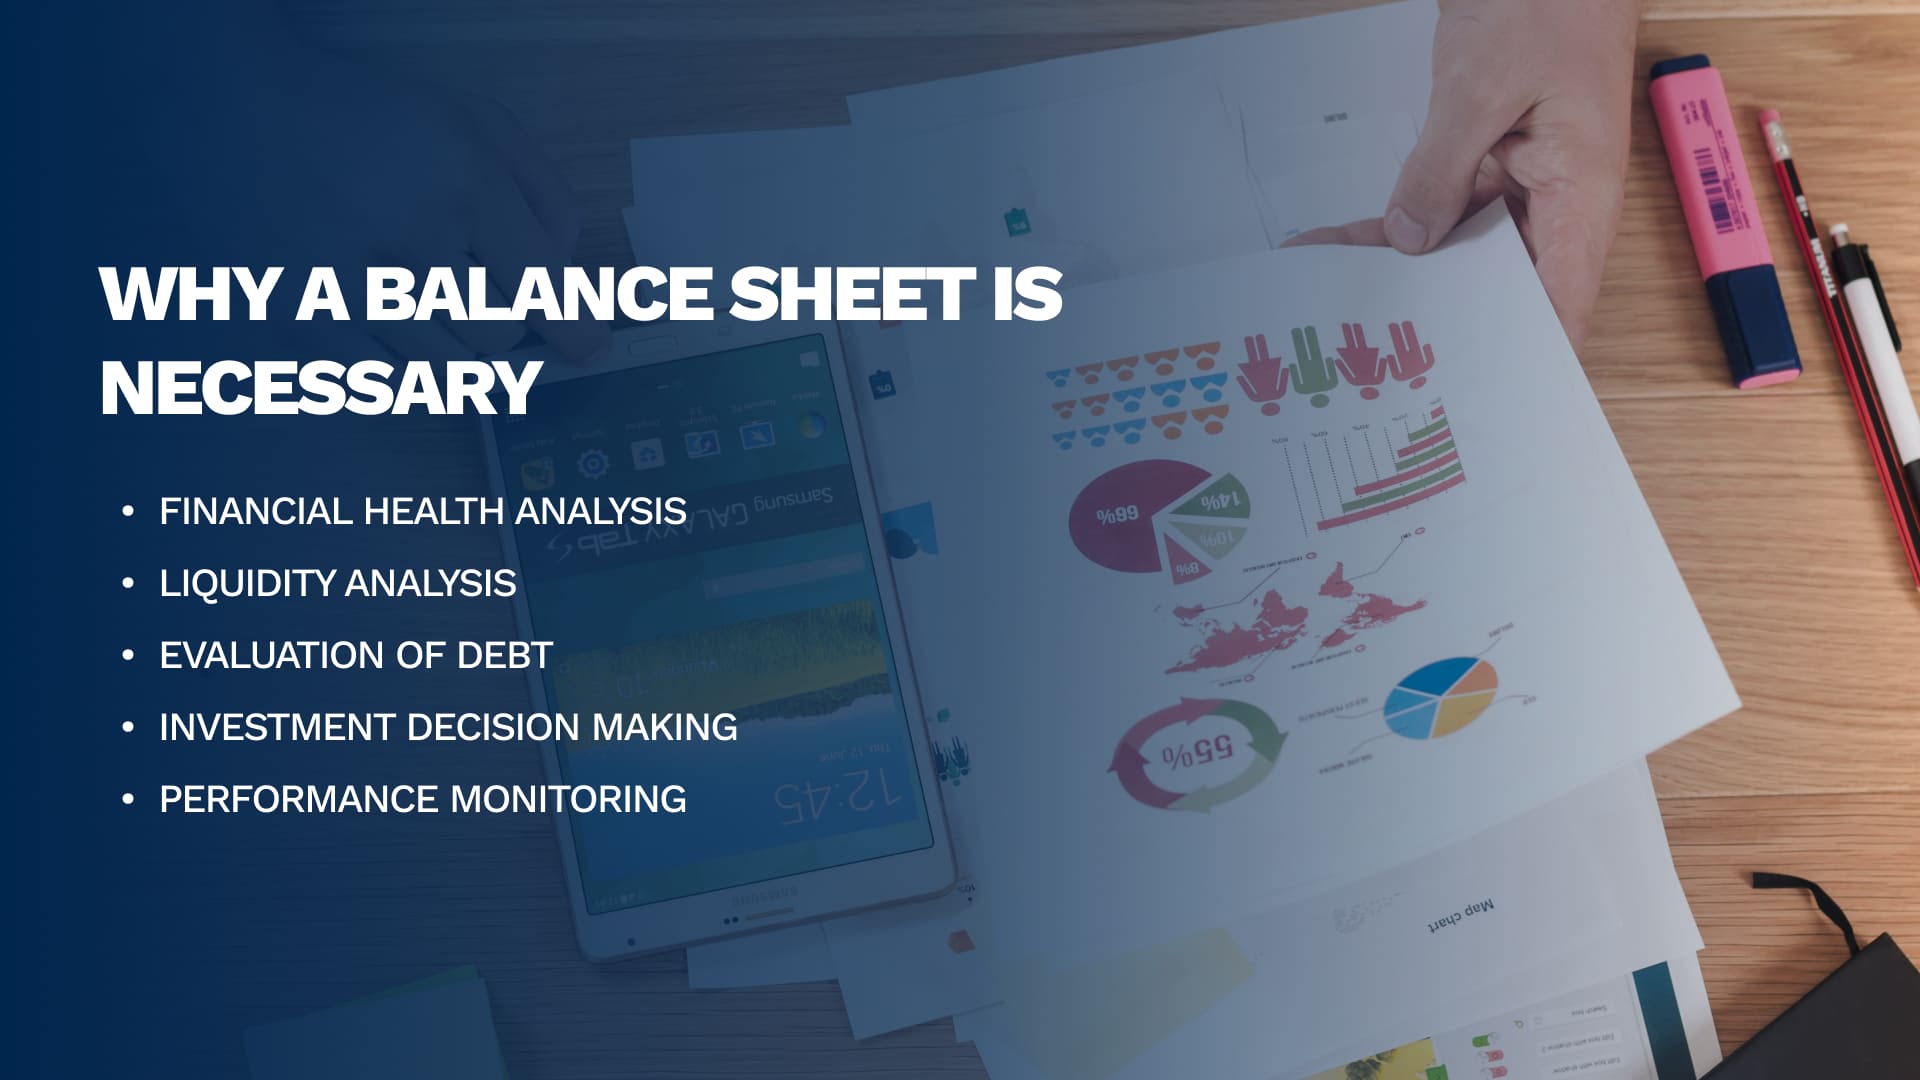 Why a Balance Sheet is Necessary